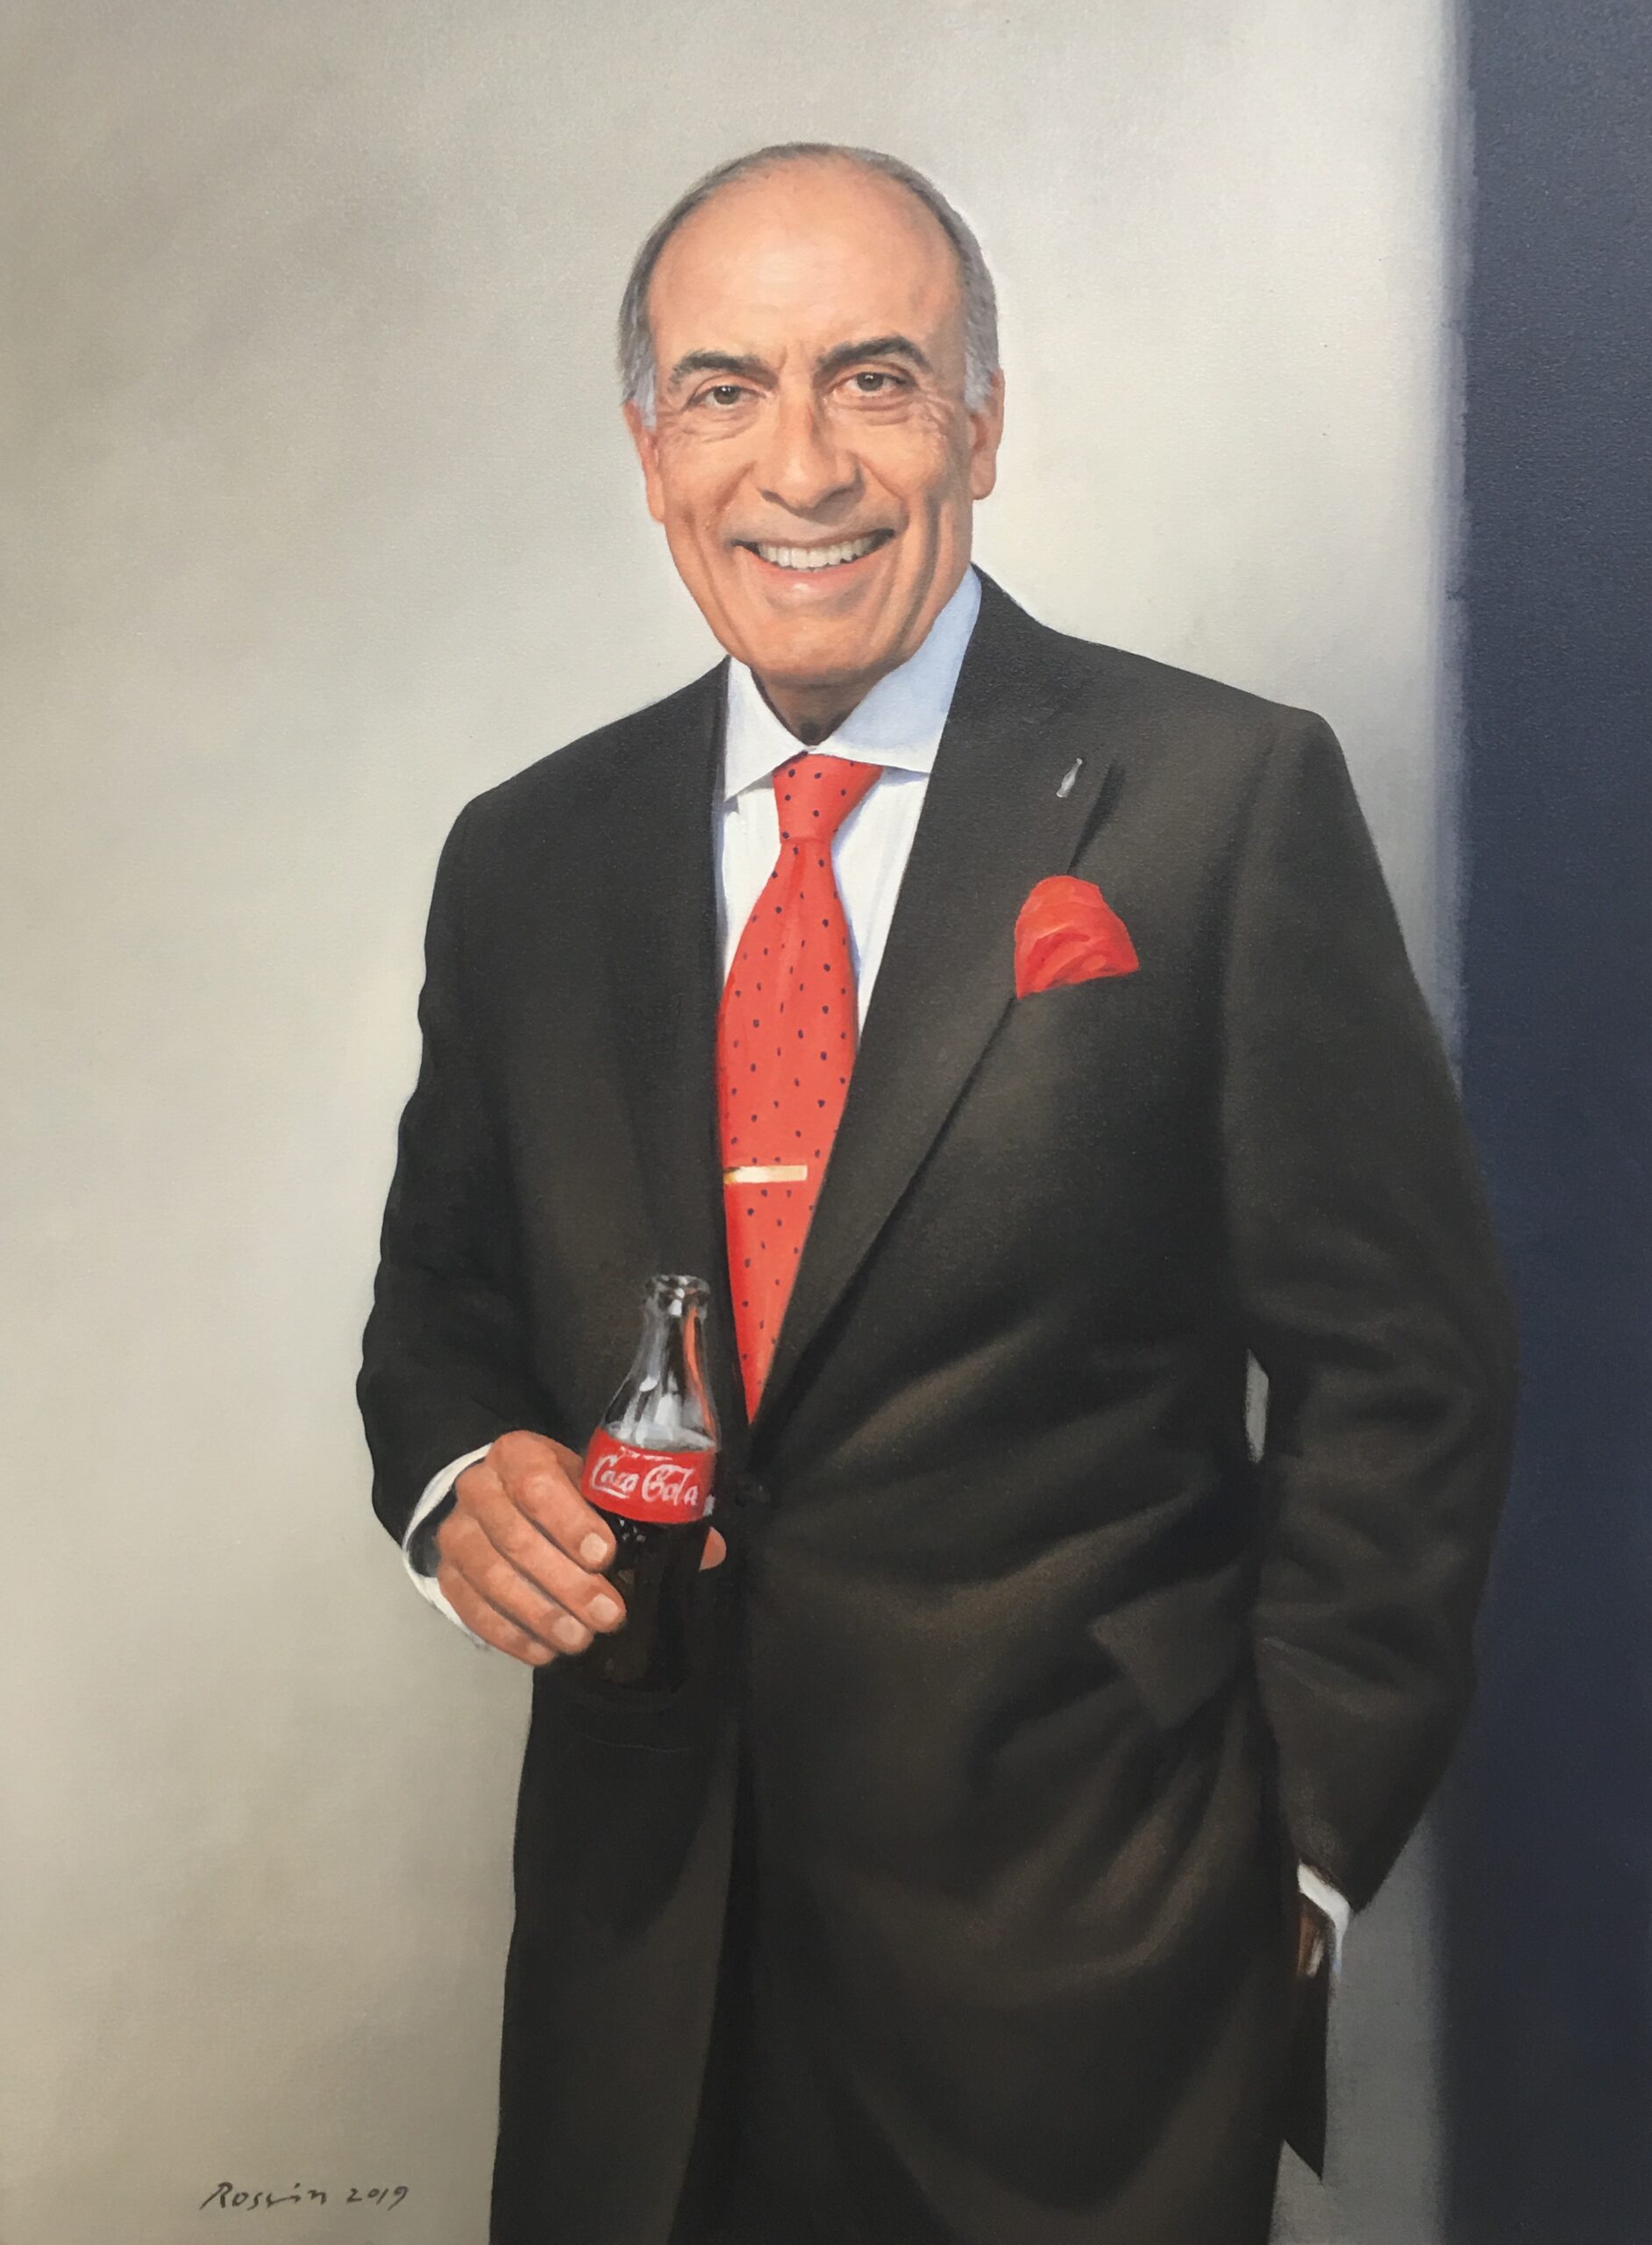 Portrait of former Coca-Cola CEO, Muhtar Kent painted by artist Ross Rossin